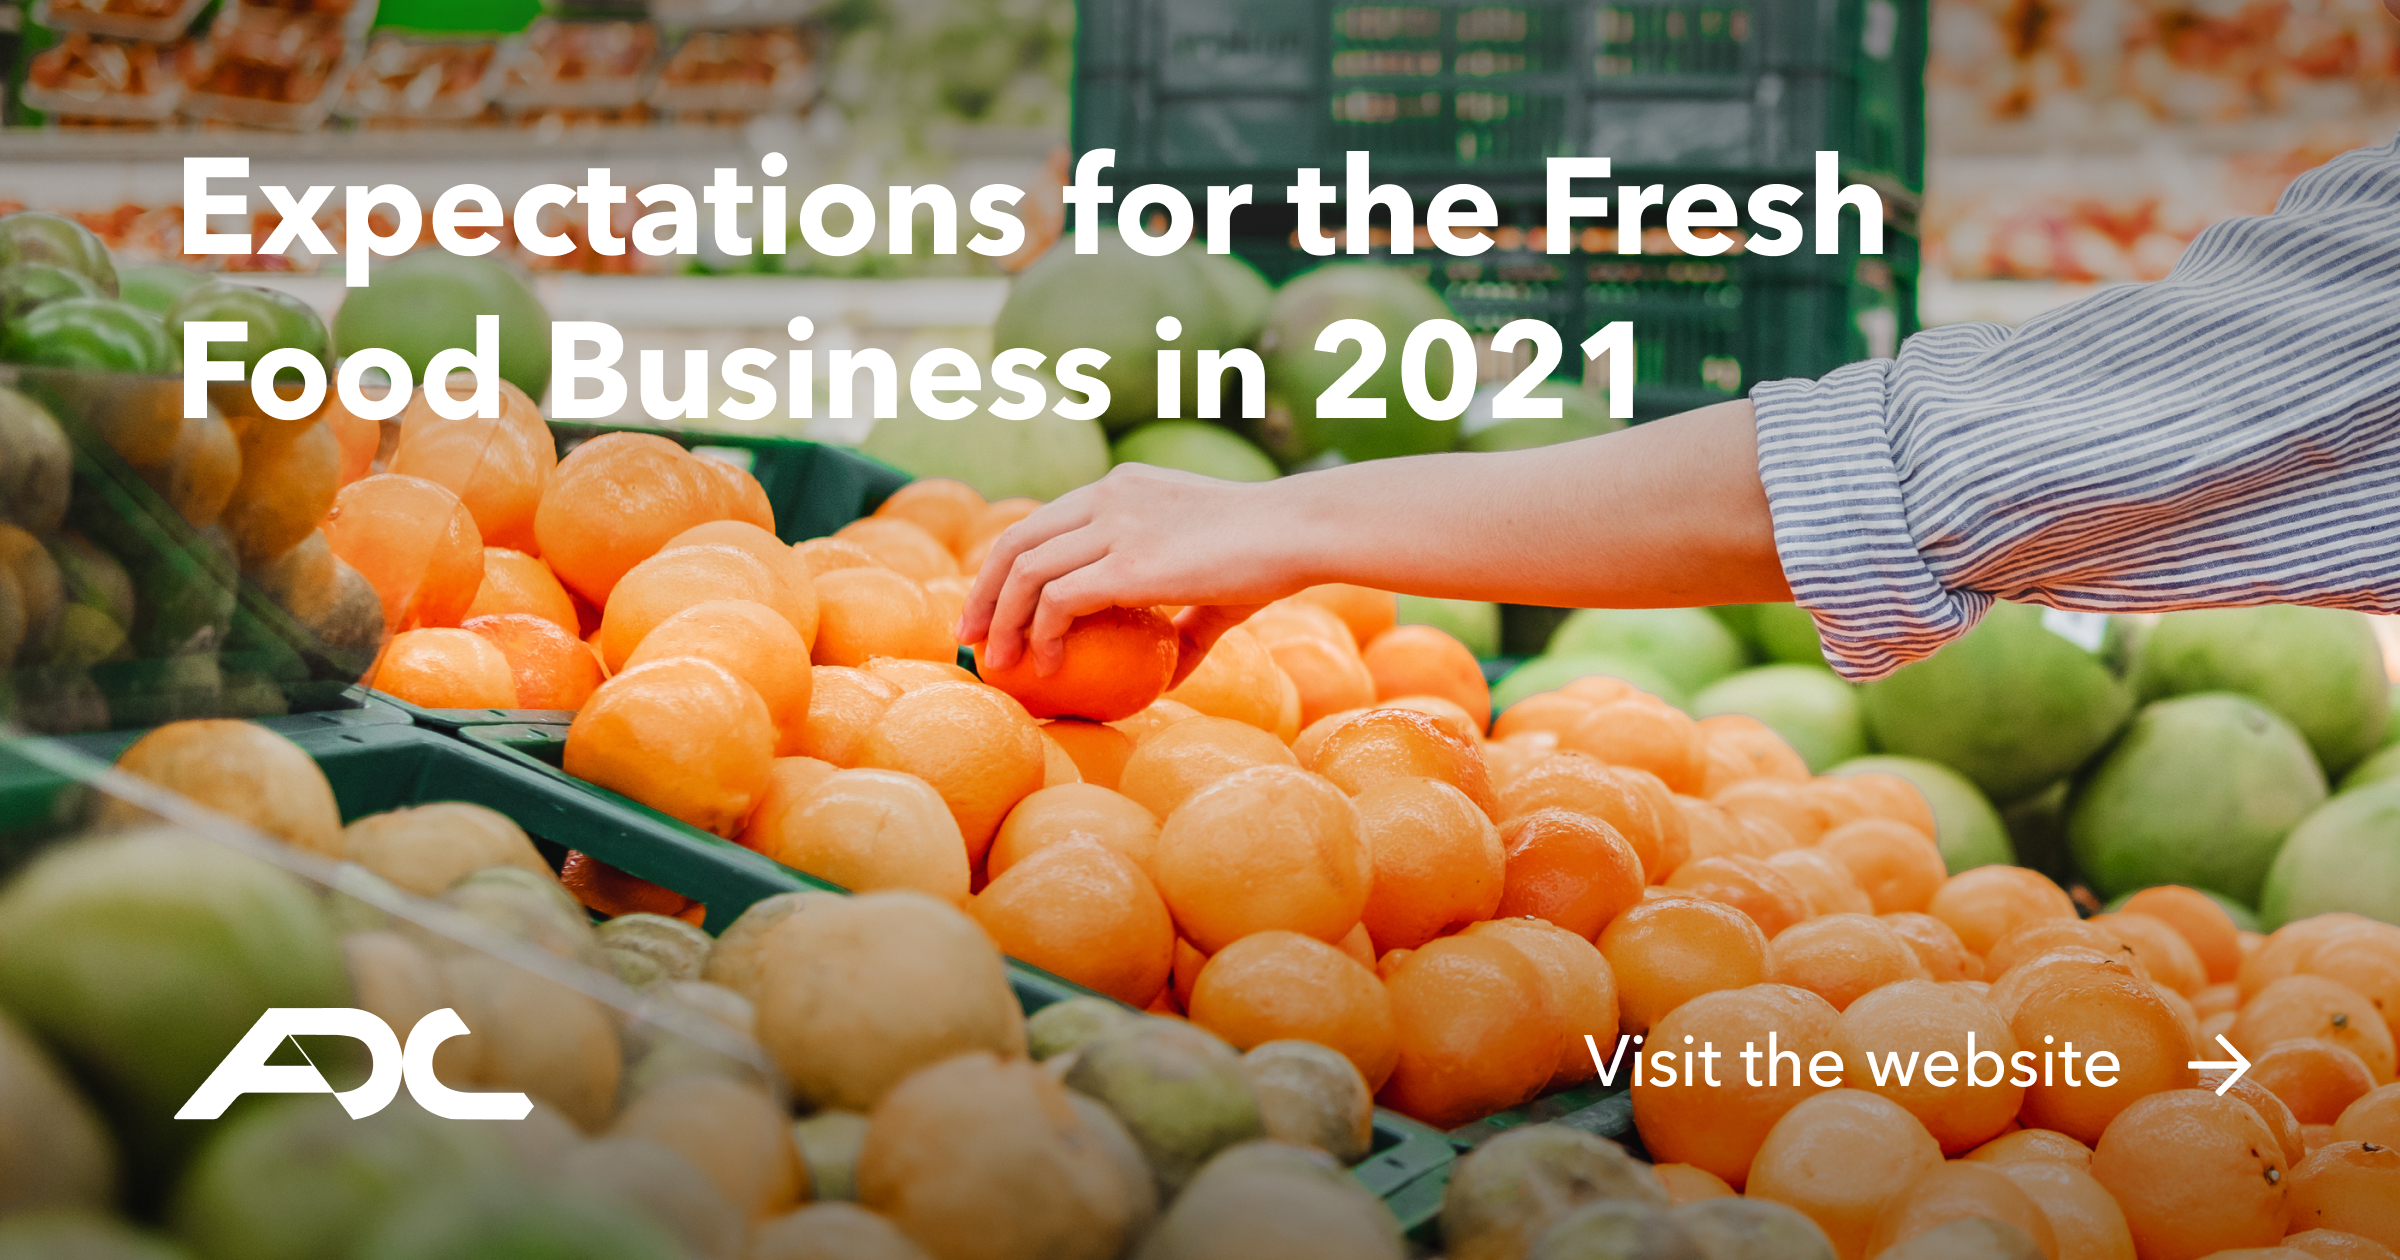 Expectations for the Fresh Food Business in 2021